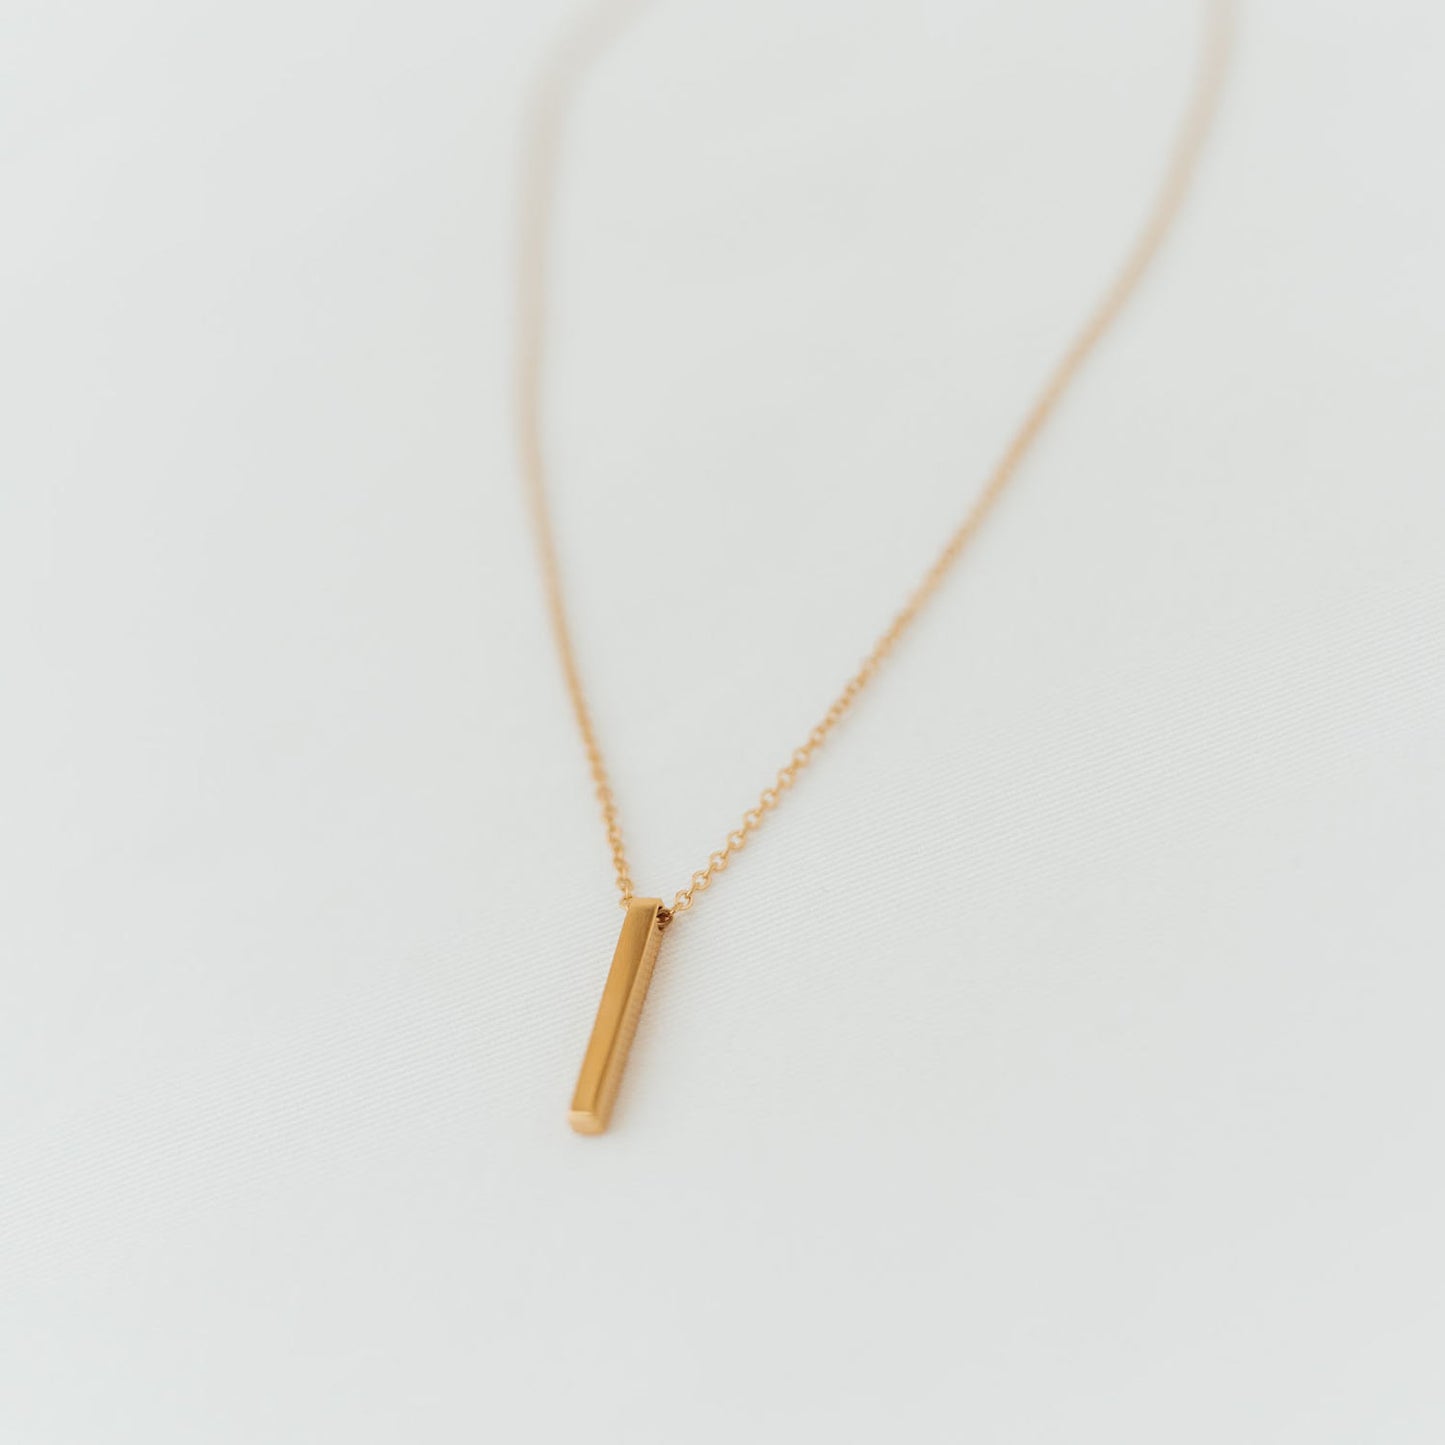 Kette "Bar Necklace" (Stainless Steel)